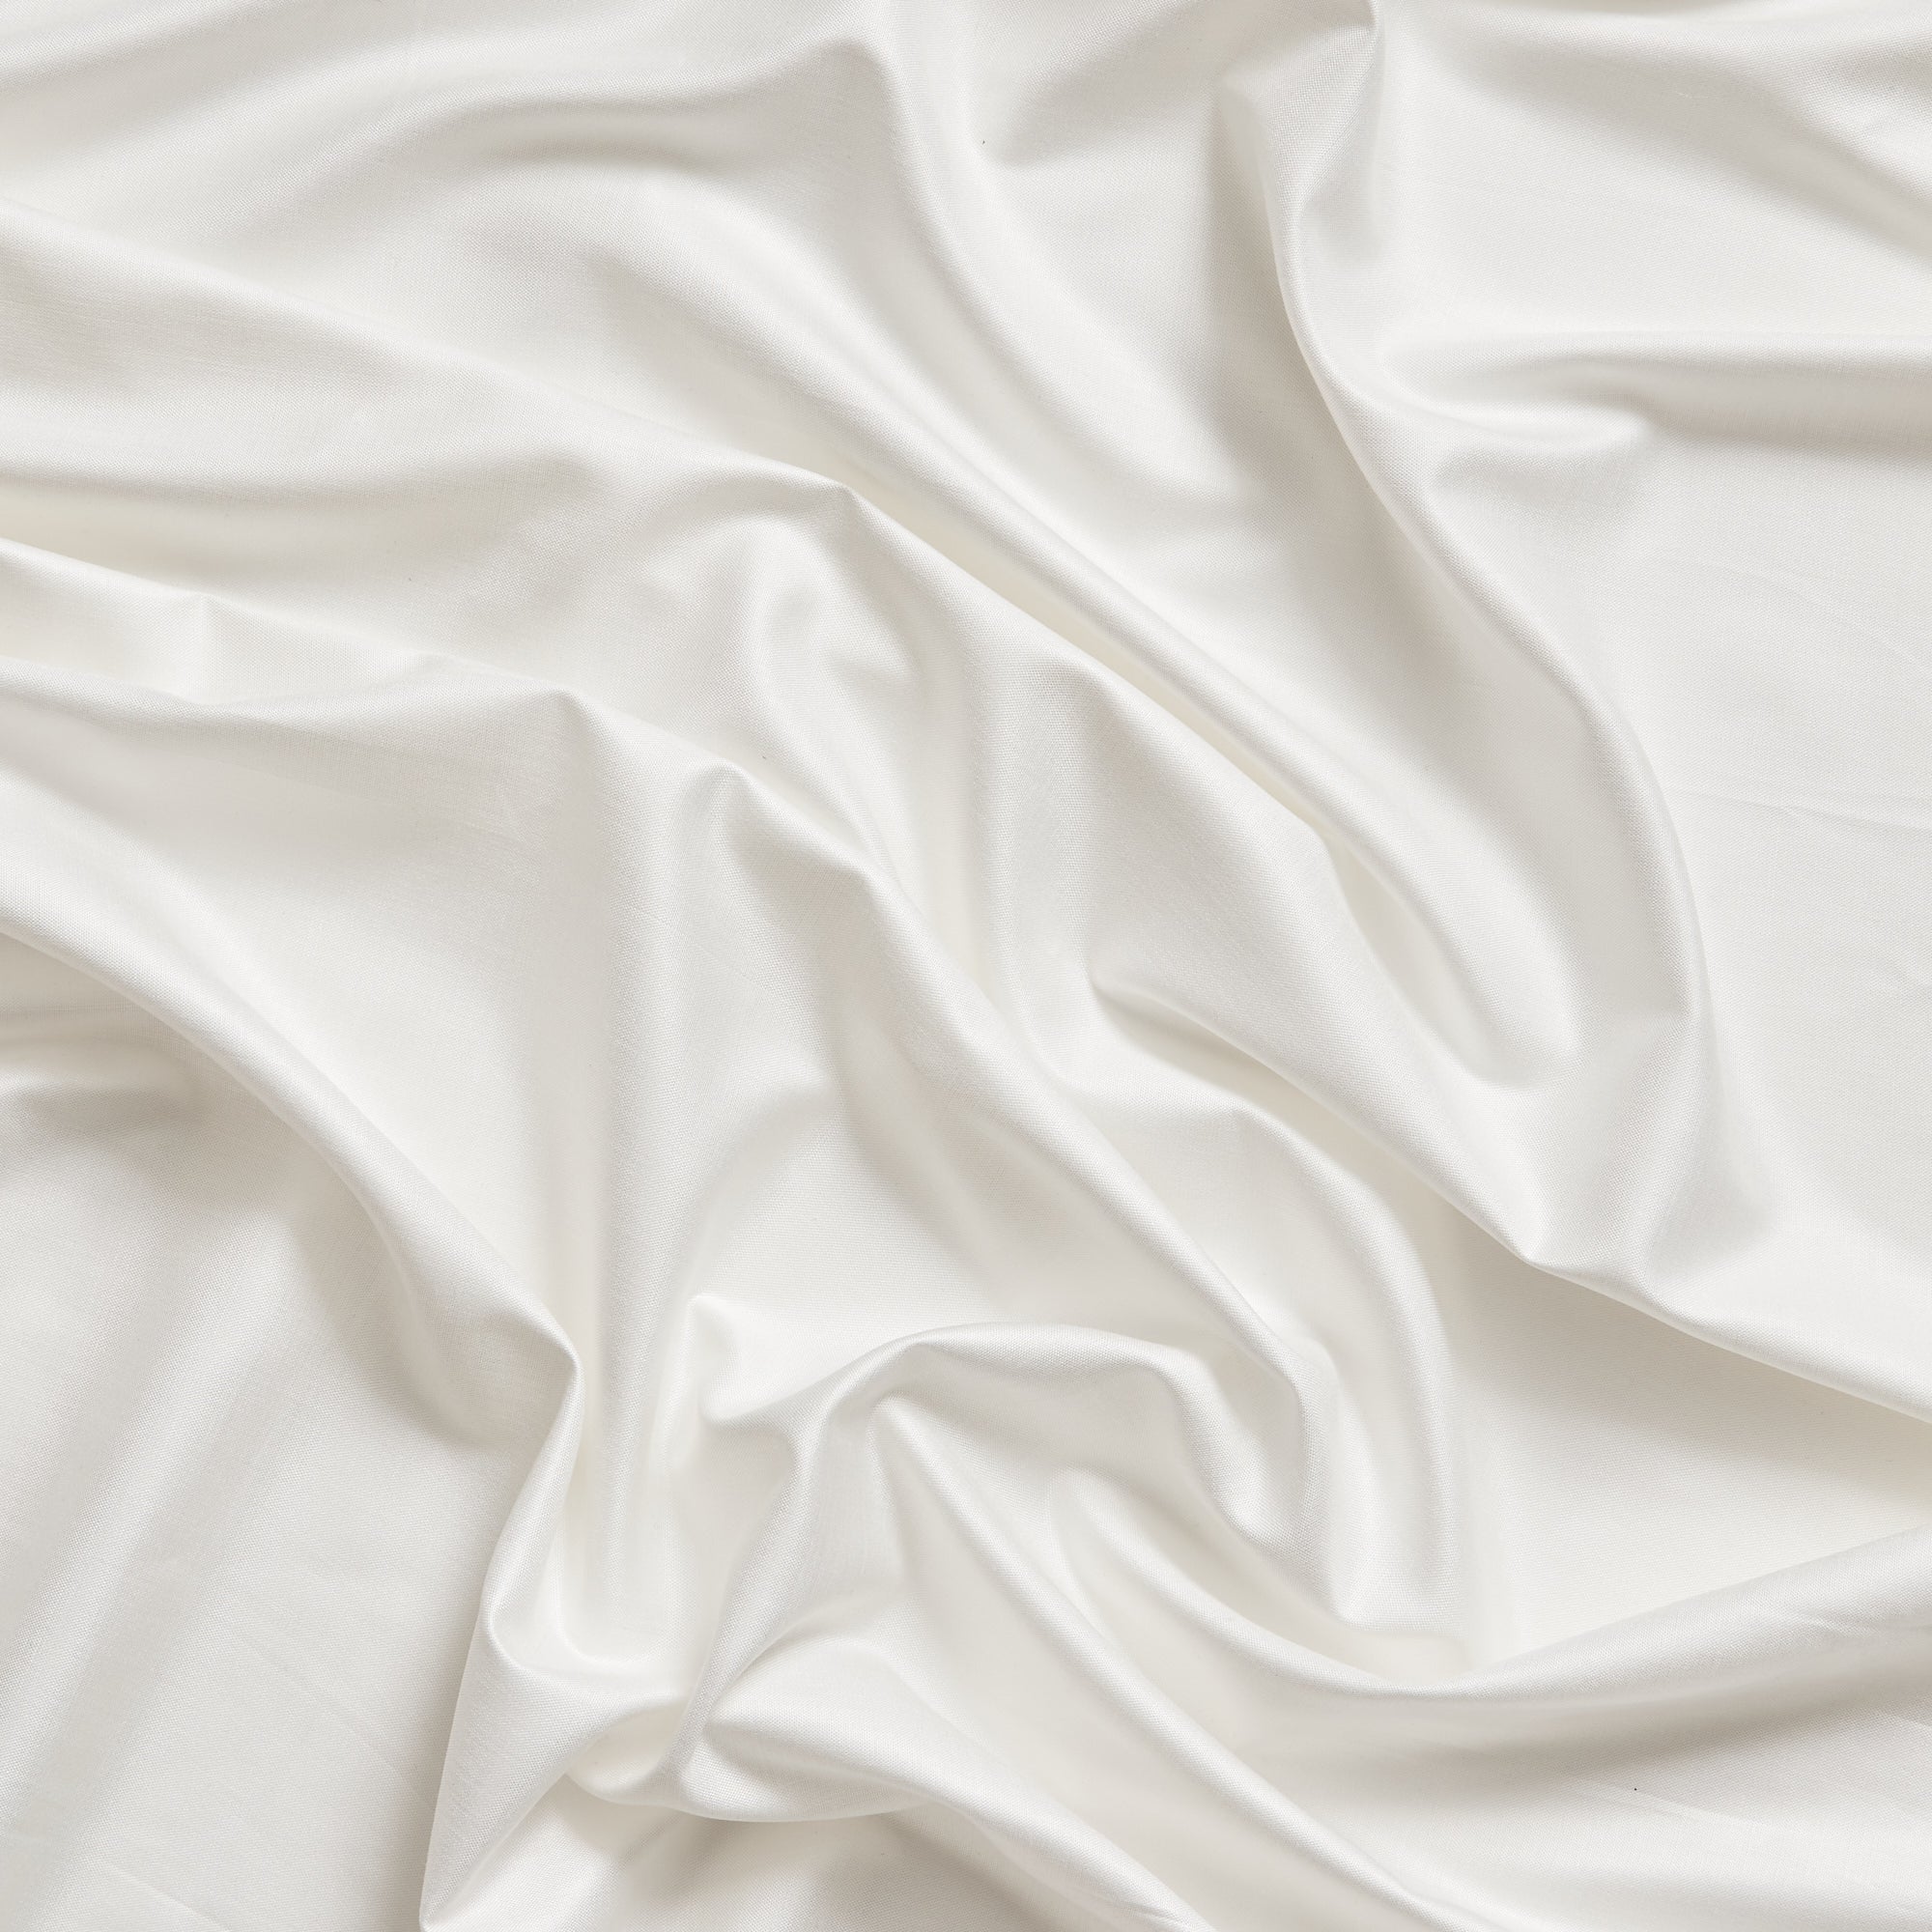 Flex displaying the white color version with a smooth wet leather look stretch viscose blended with spandex and featuring excellent drape